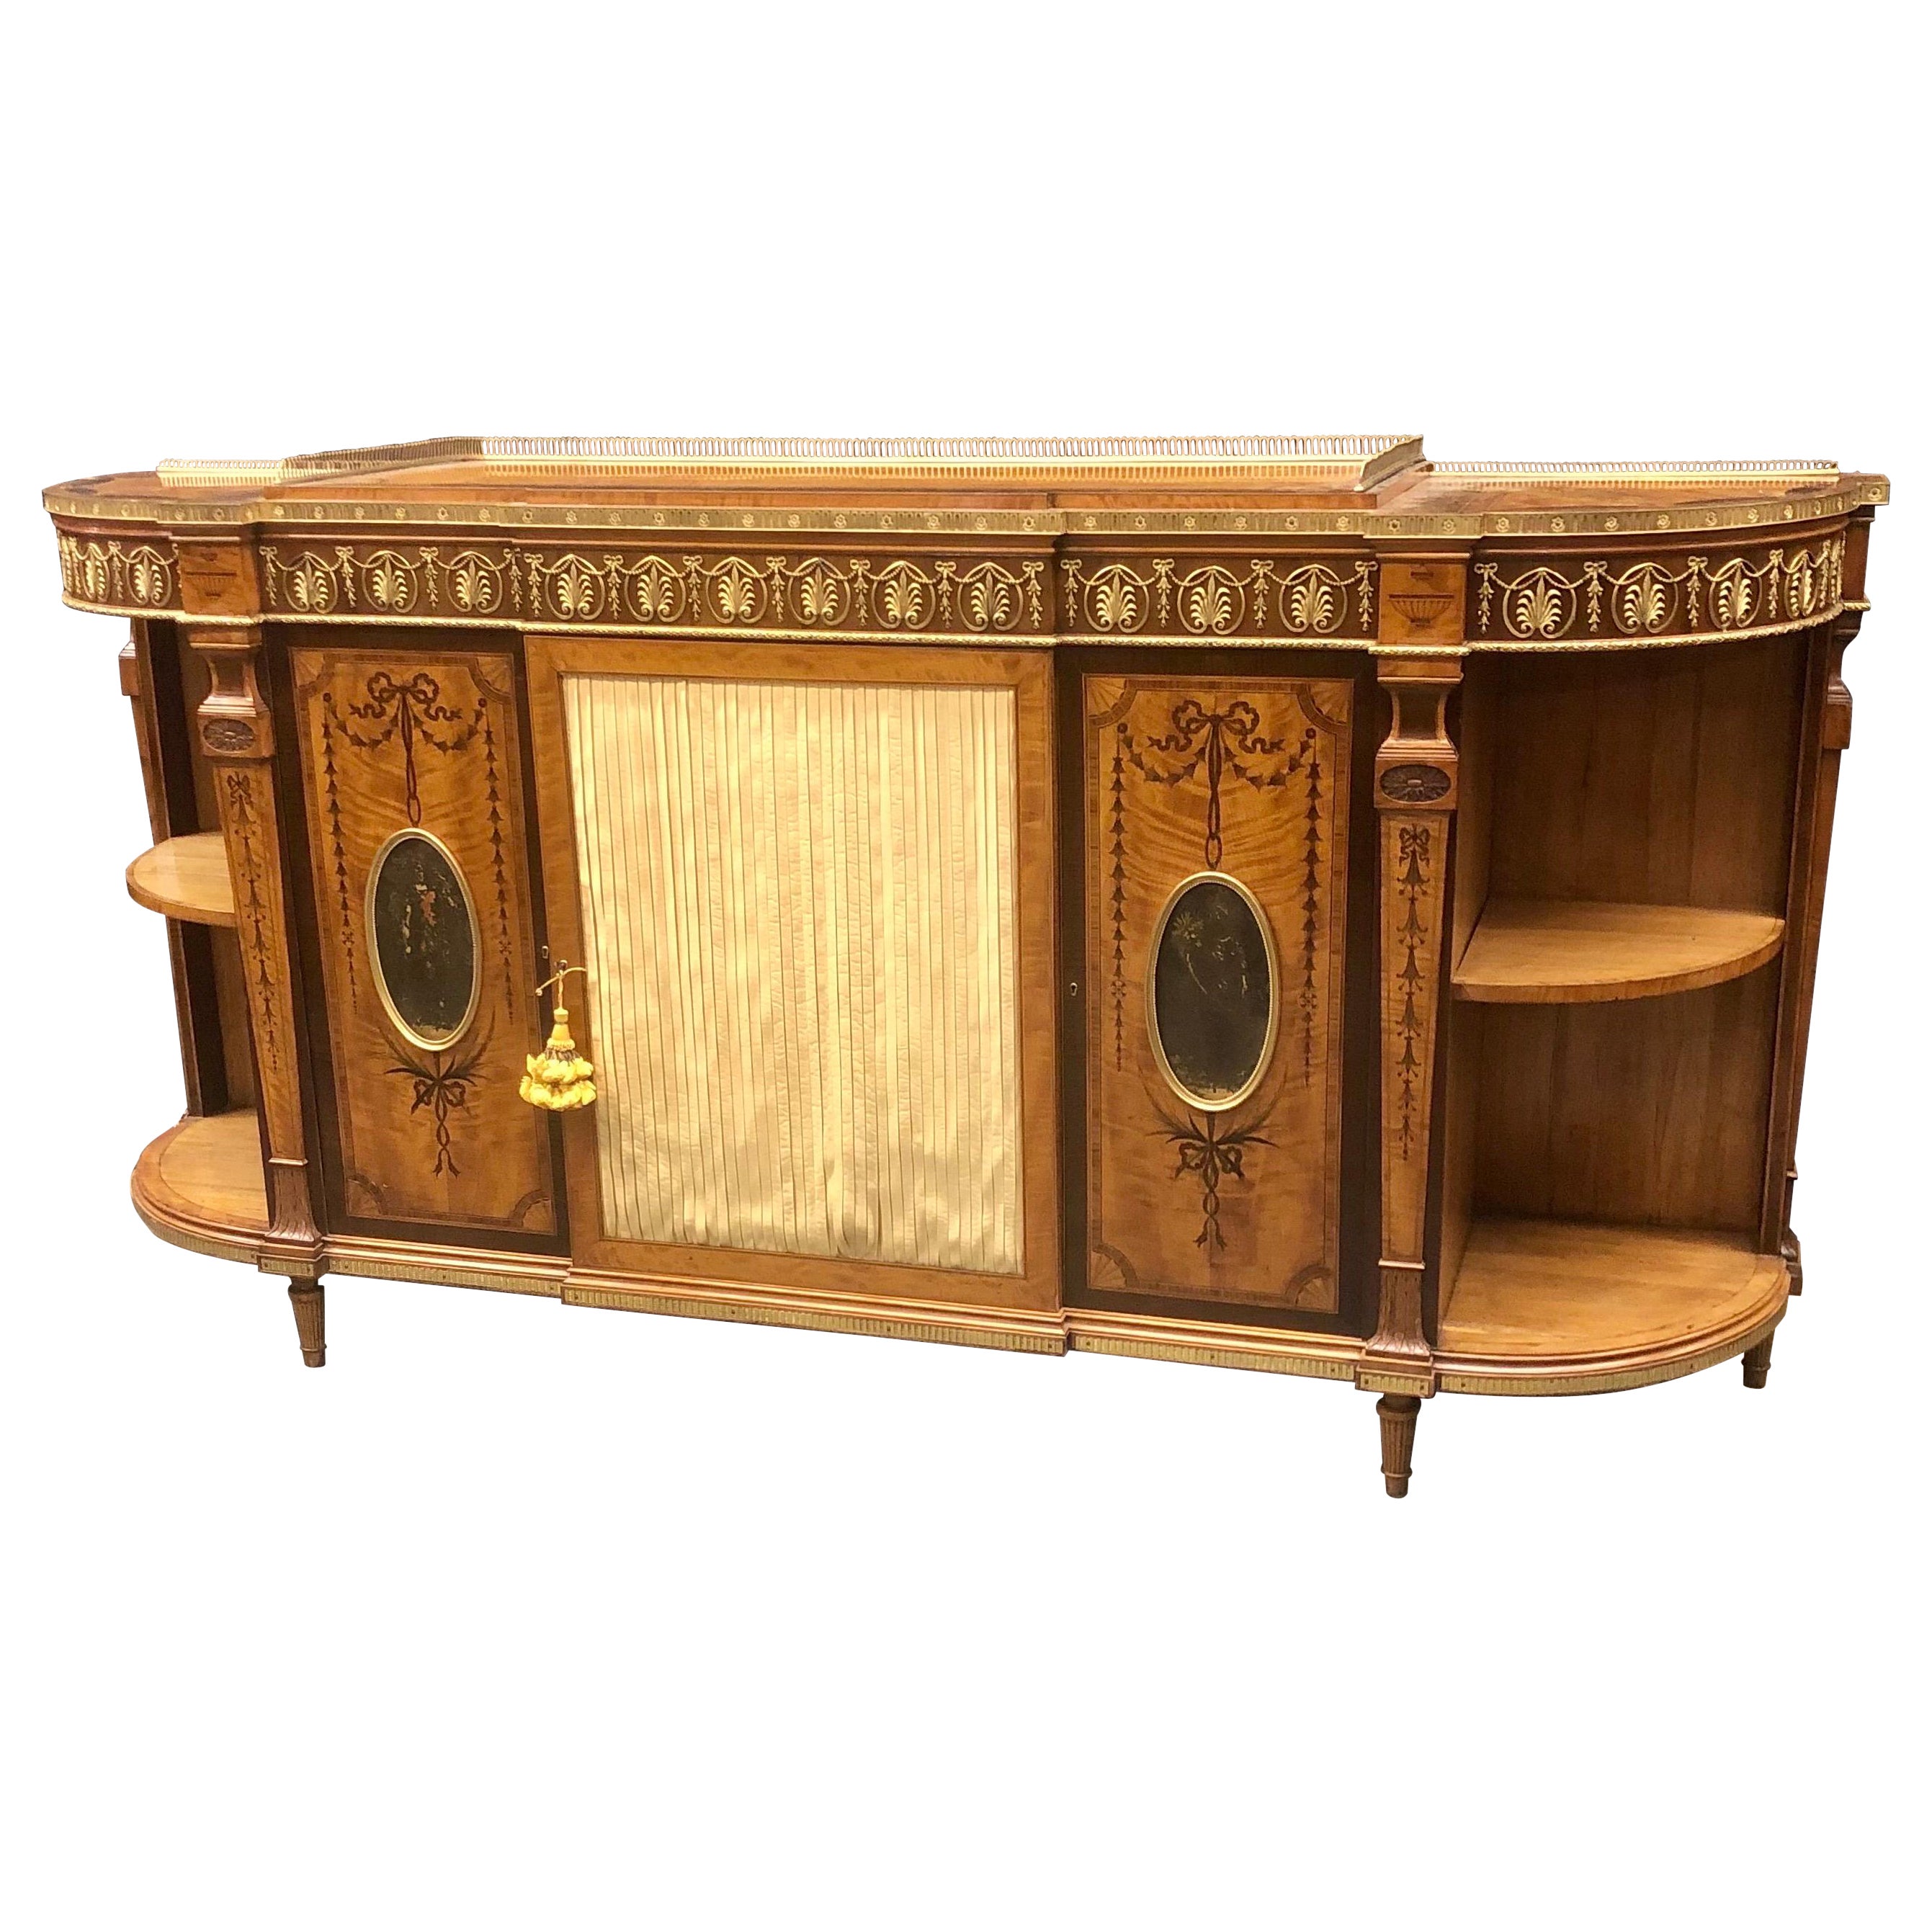 Adam Style Satinwood Credenza Stamped Wright and Mansfield, 19th Century